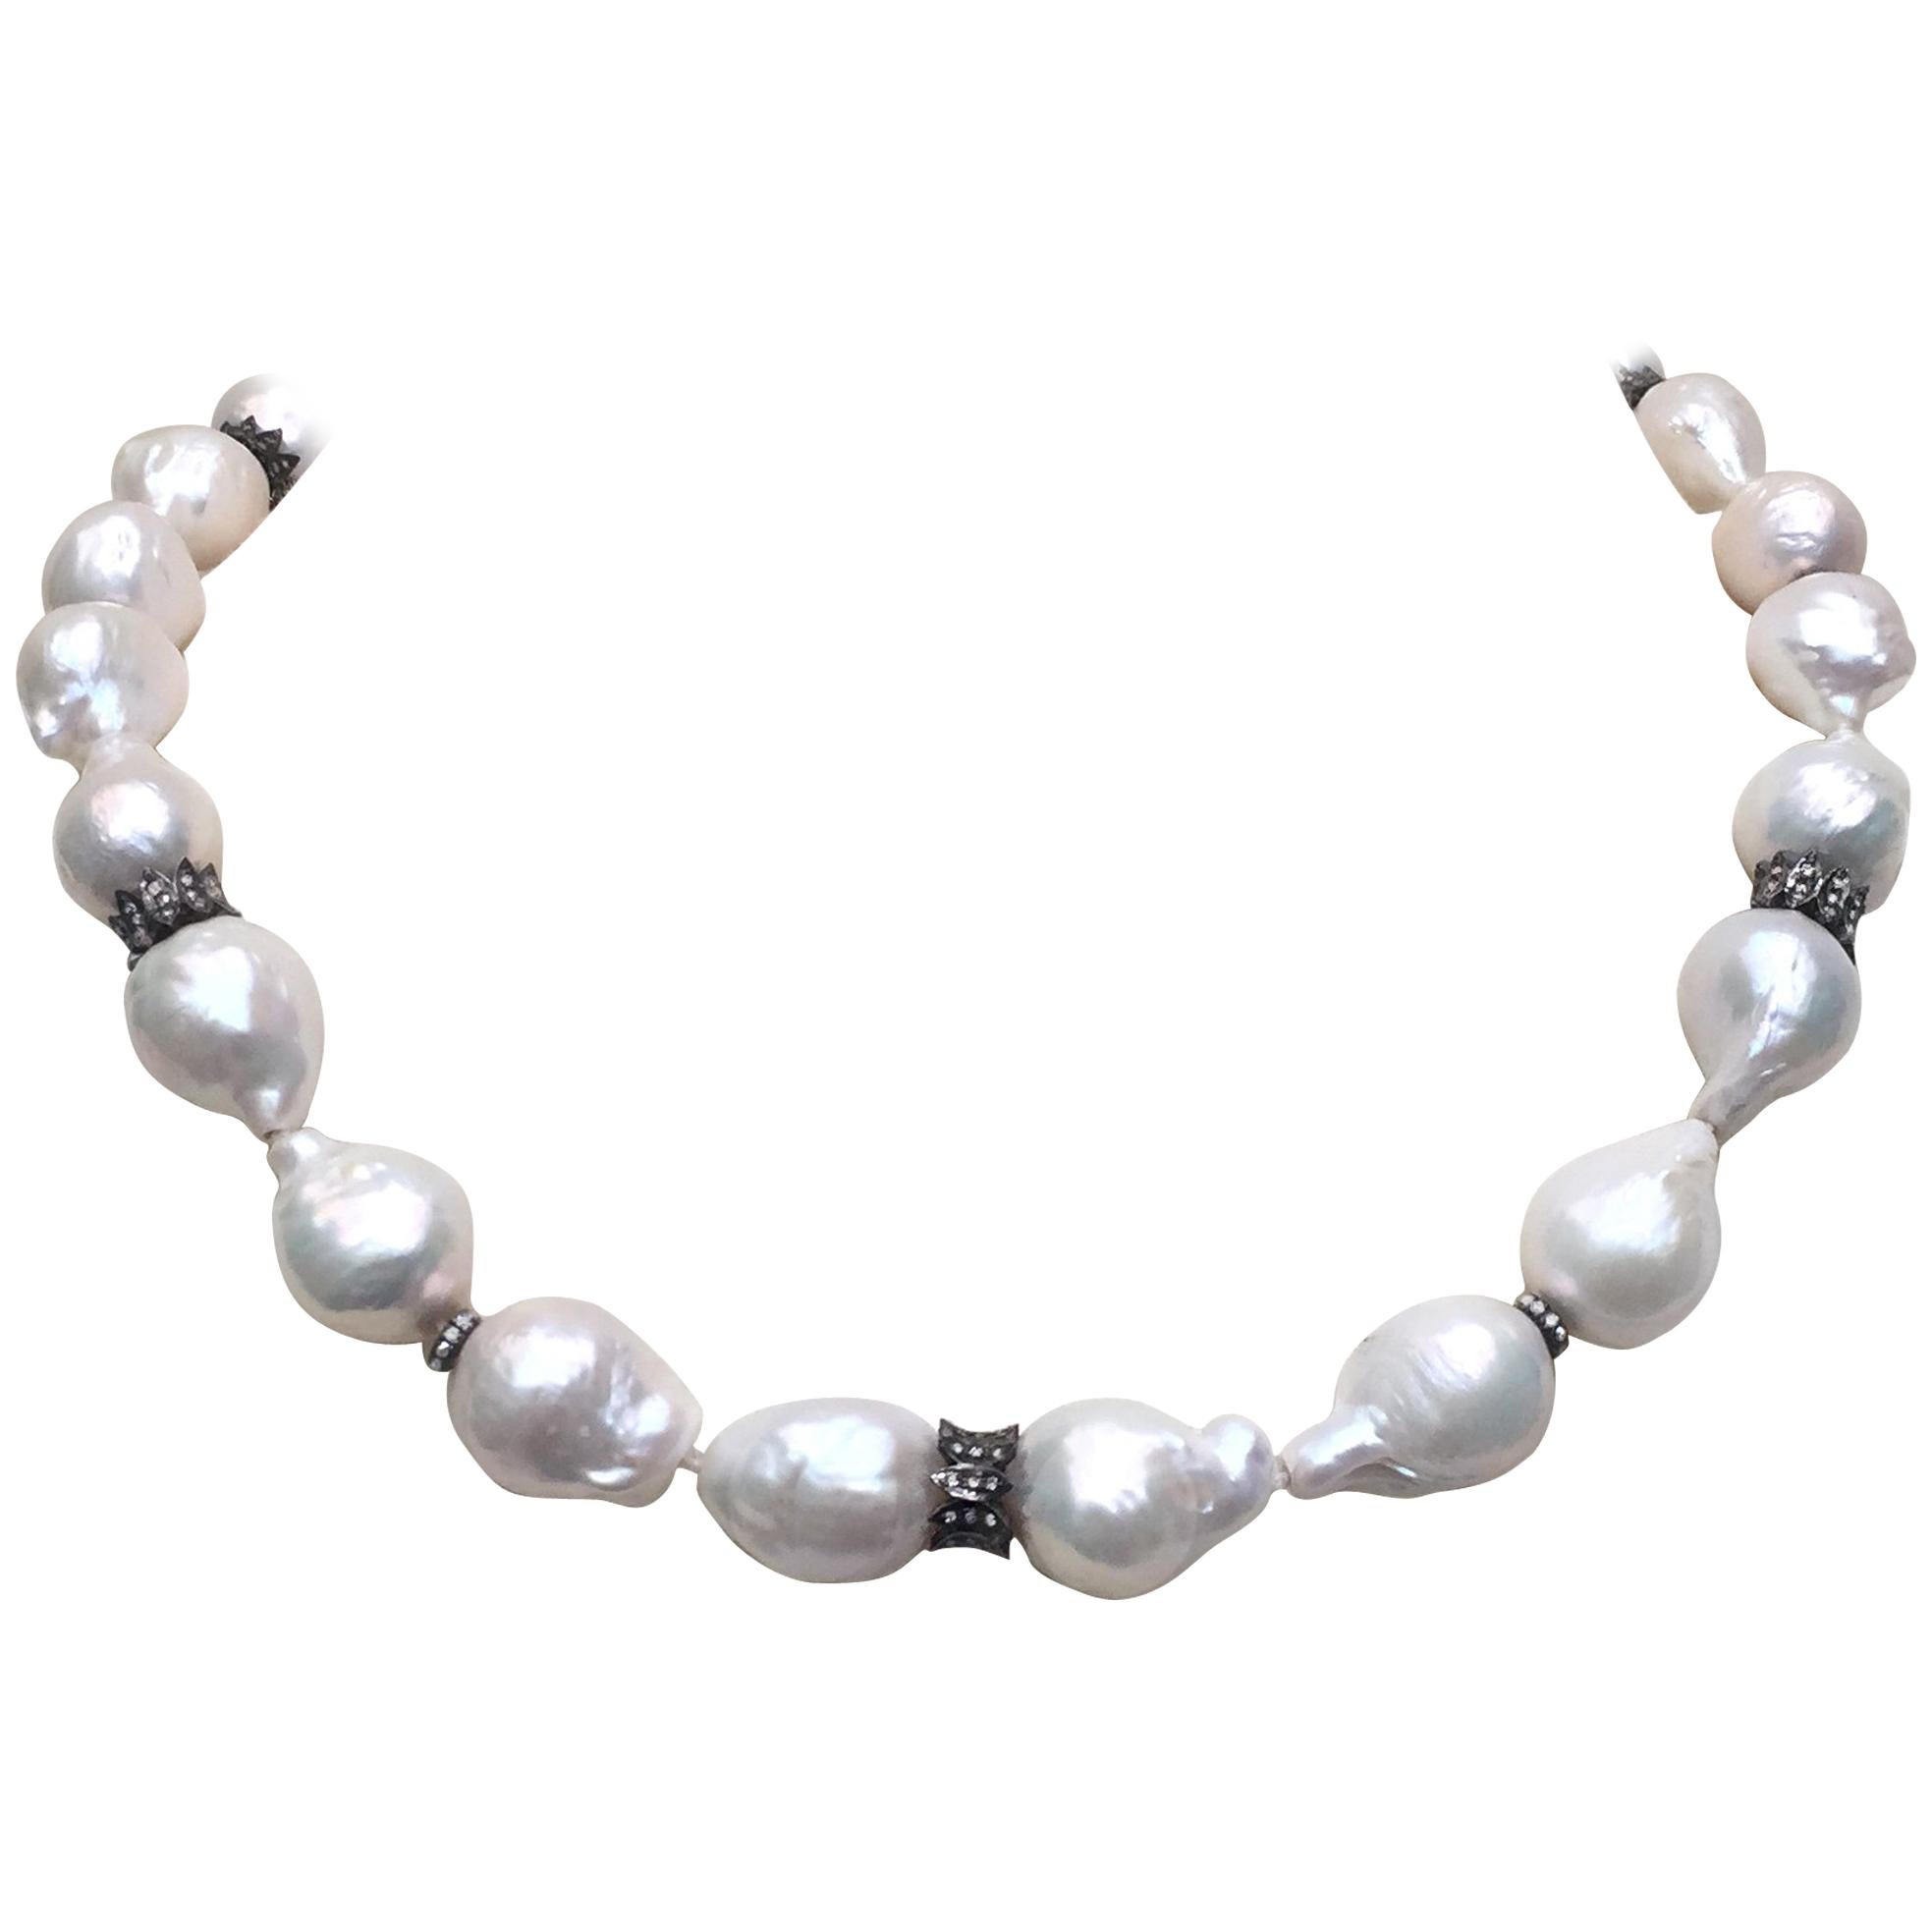 Large Baroque White Pearl Necklace with Diamond and Oxidite Silver Dividers